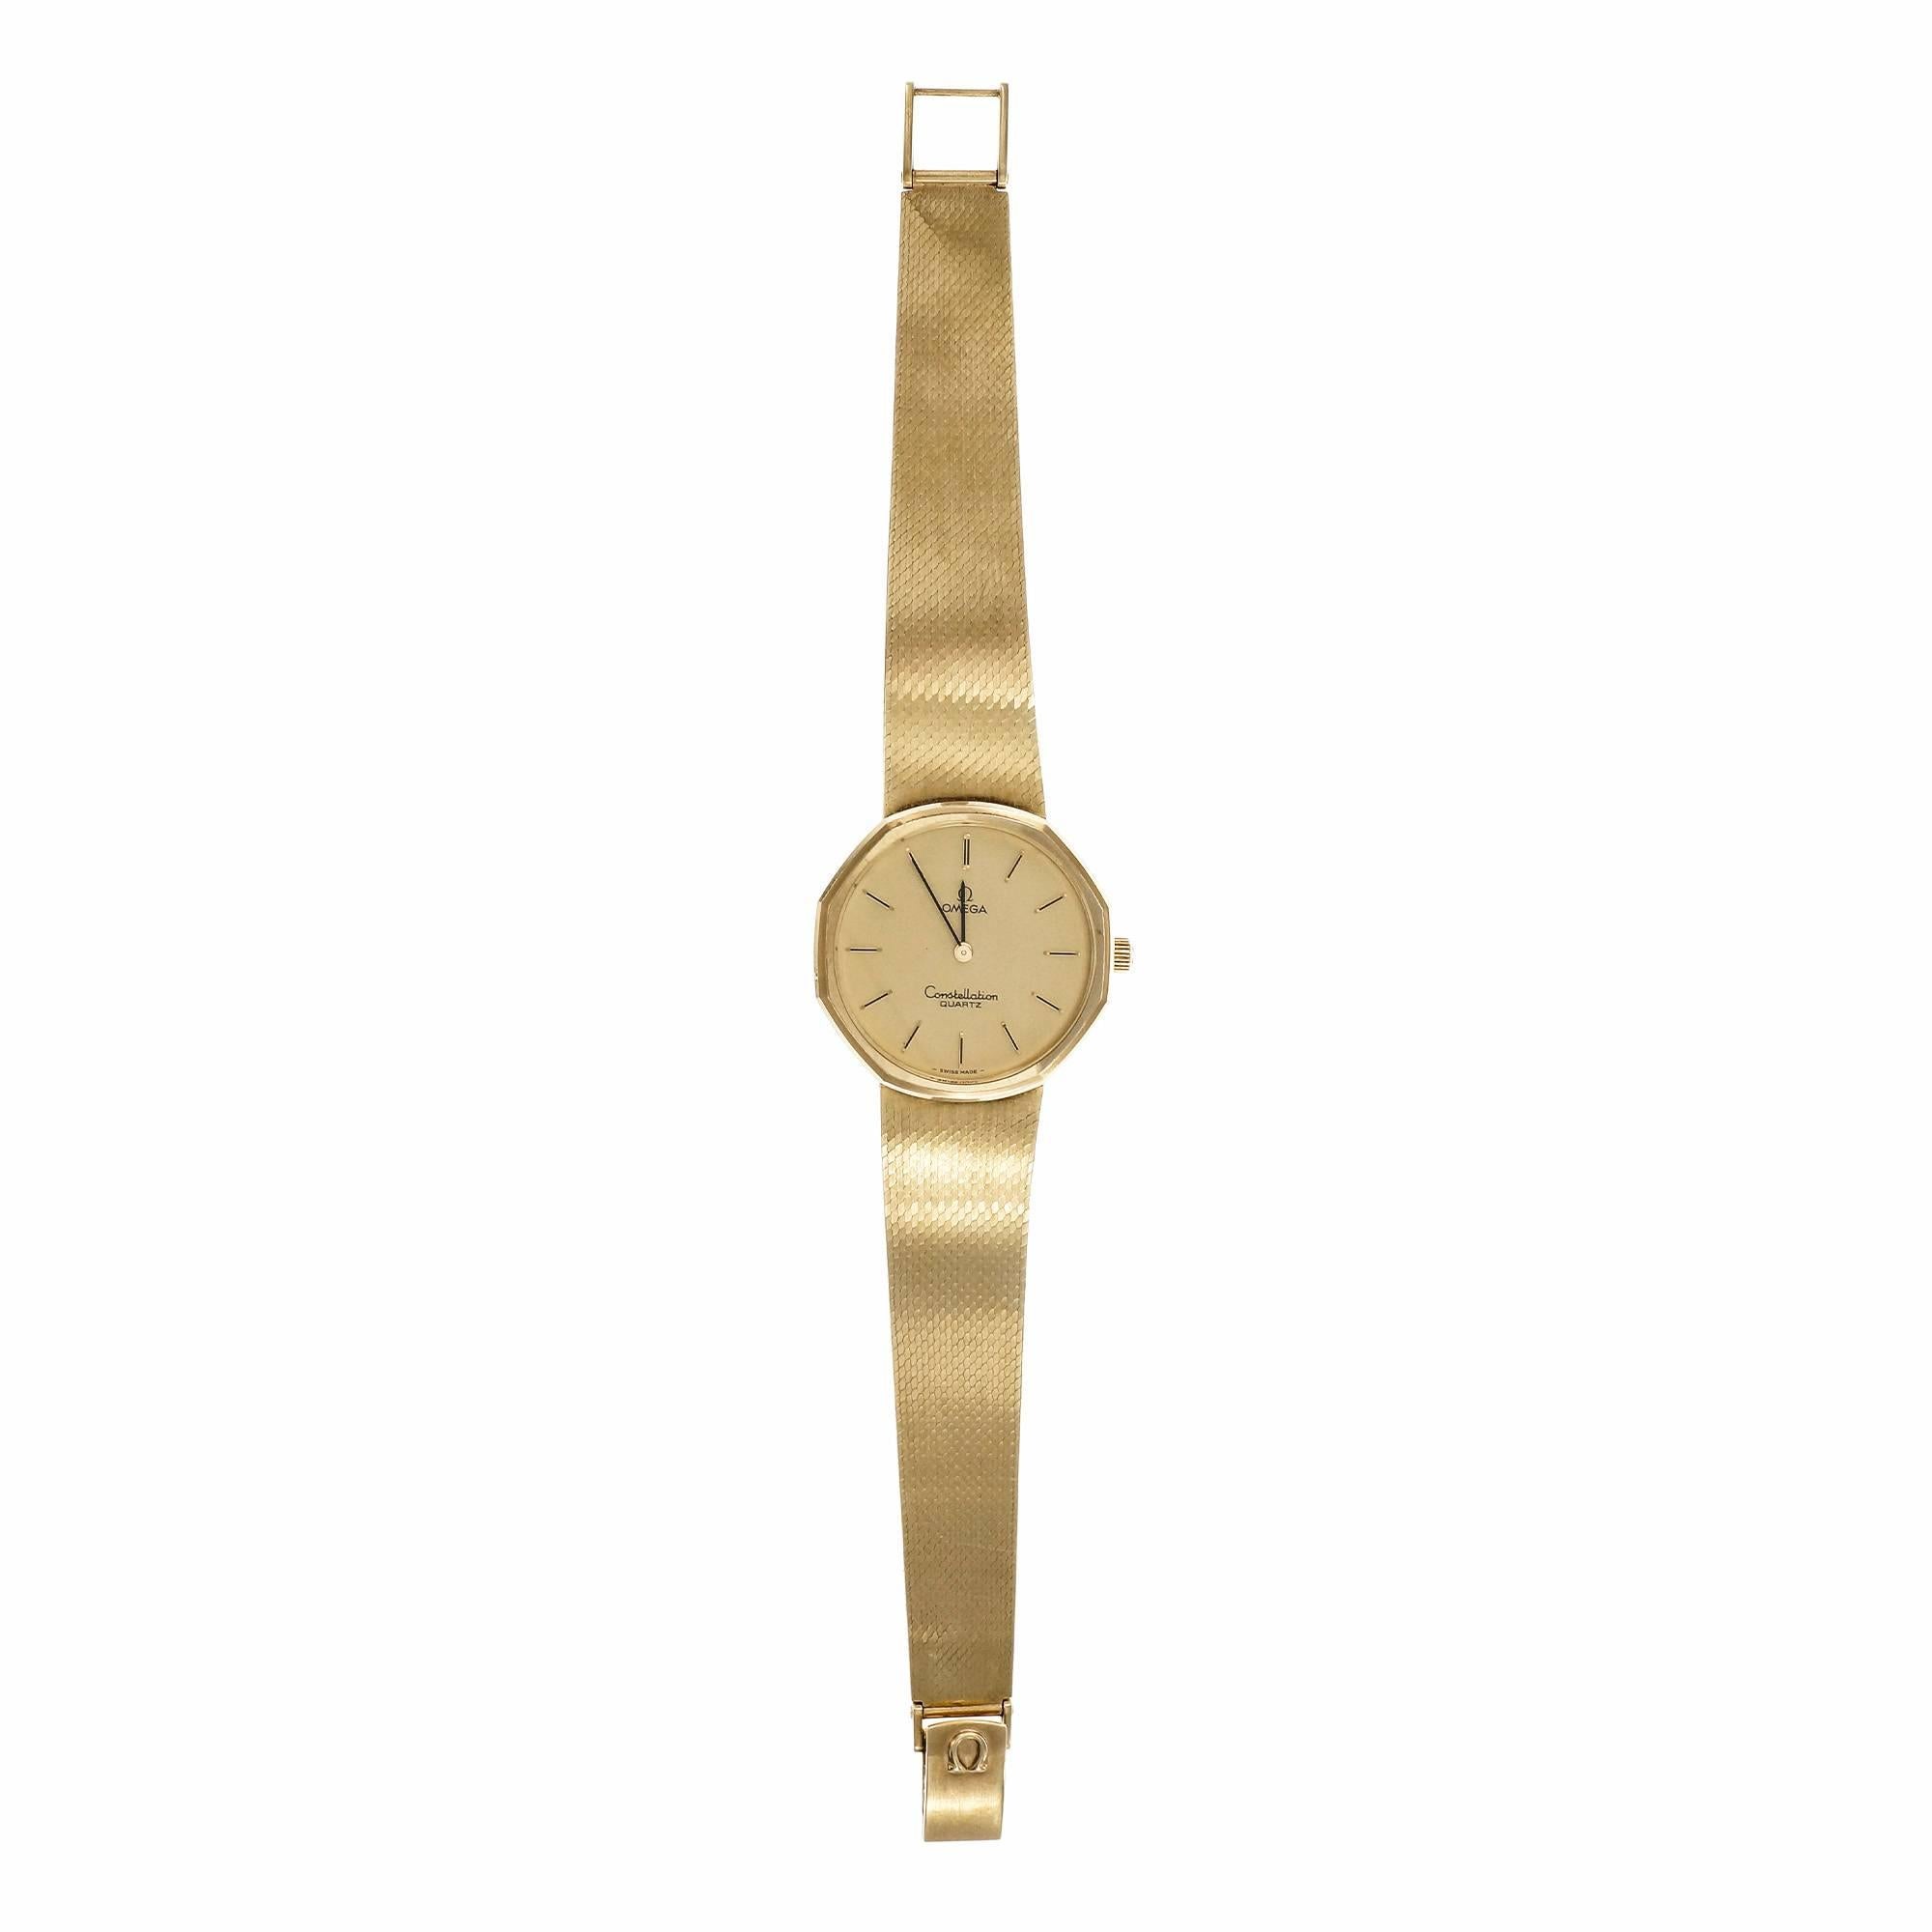 Omega Constellation Quartz wrist watch. 14k gold with Omega 14k mesh band.

14k yellow gold
67.5 grams
Band length: 7.5 – 7.75 inches
Length: 33mm
Width: 33mm
Band width at case: 18mm
Case thickness: 7.4mm
Band: 14k Omega 1291/253
Crystal: